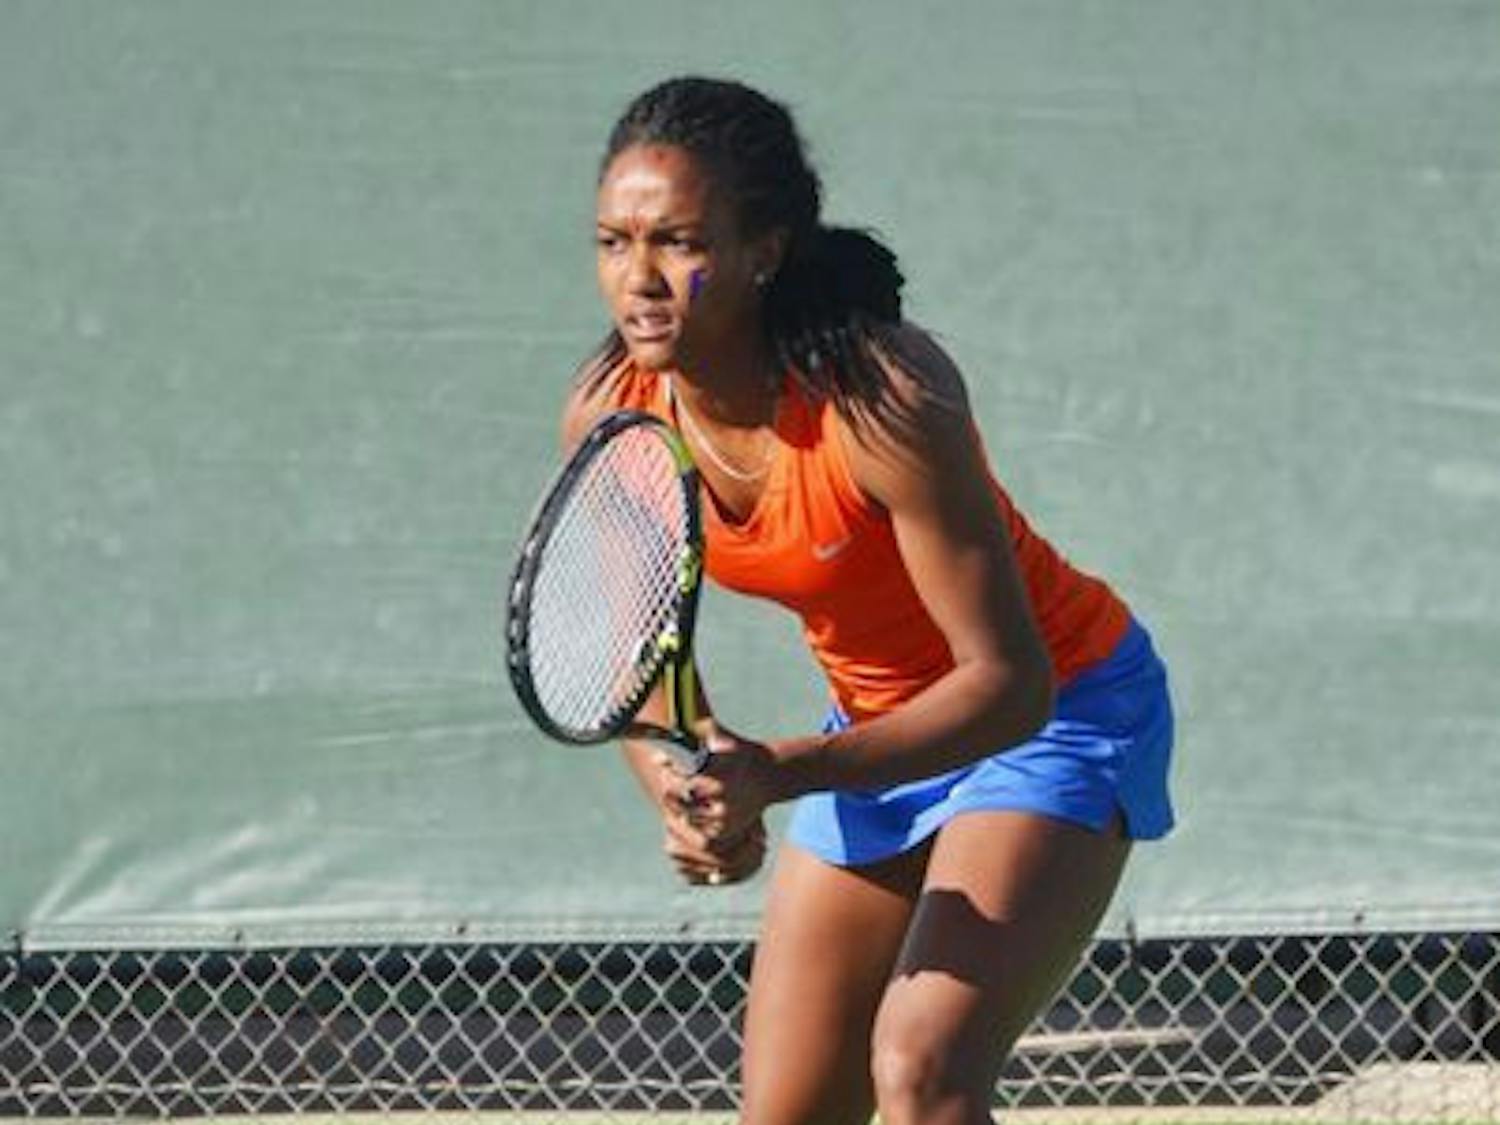 Brianna Morgan awaits a serve during Florida's 4-0 win against Maryland on Jan. 25 at the Ring Tennis Complex.&nbsp;Morgan defeated Georgia Tech's Kendal Woodard, 6-2, 6-3 at the No. 3 position on Saturday to help the Gators advance to the NCAA Tournament Round of 16.&nbsp;